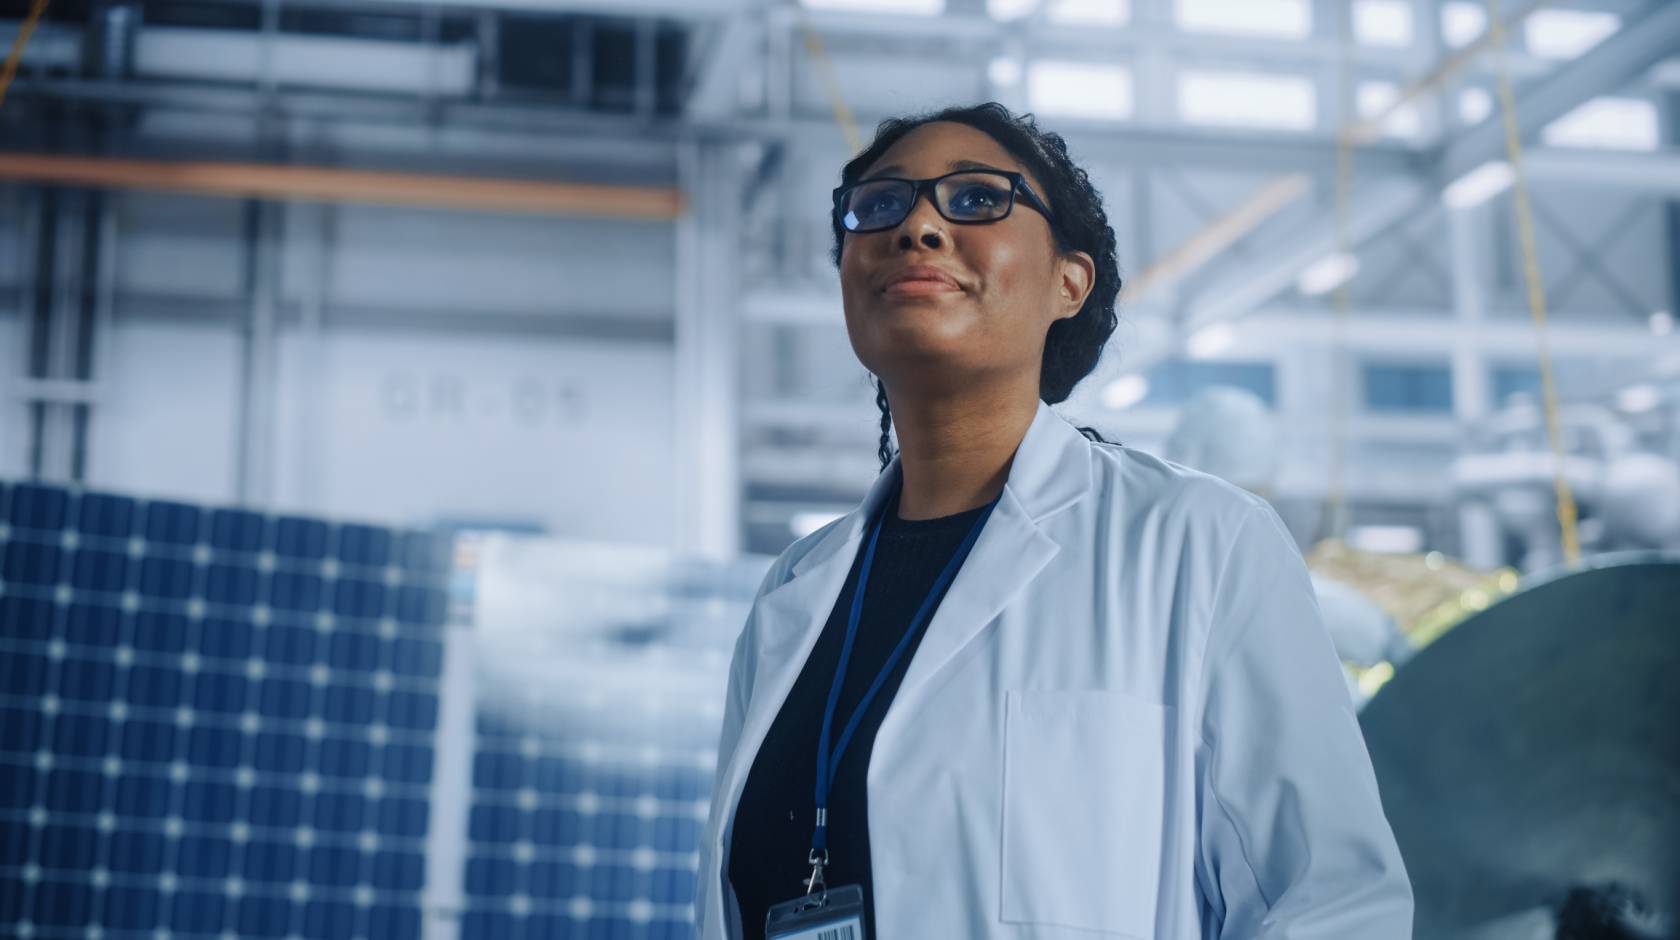 Black woman scientist looking up in a warehouse